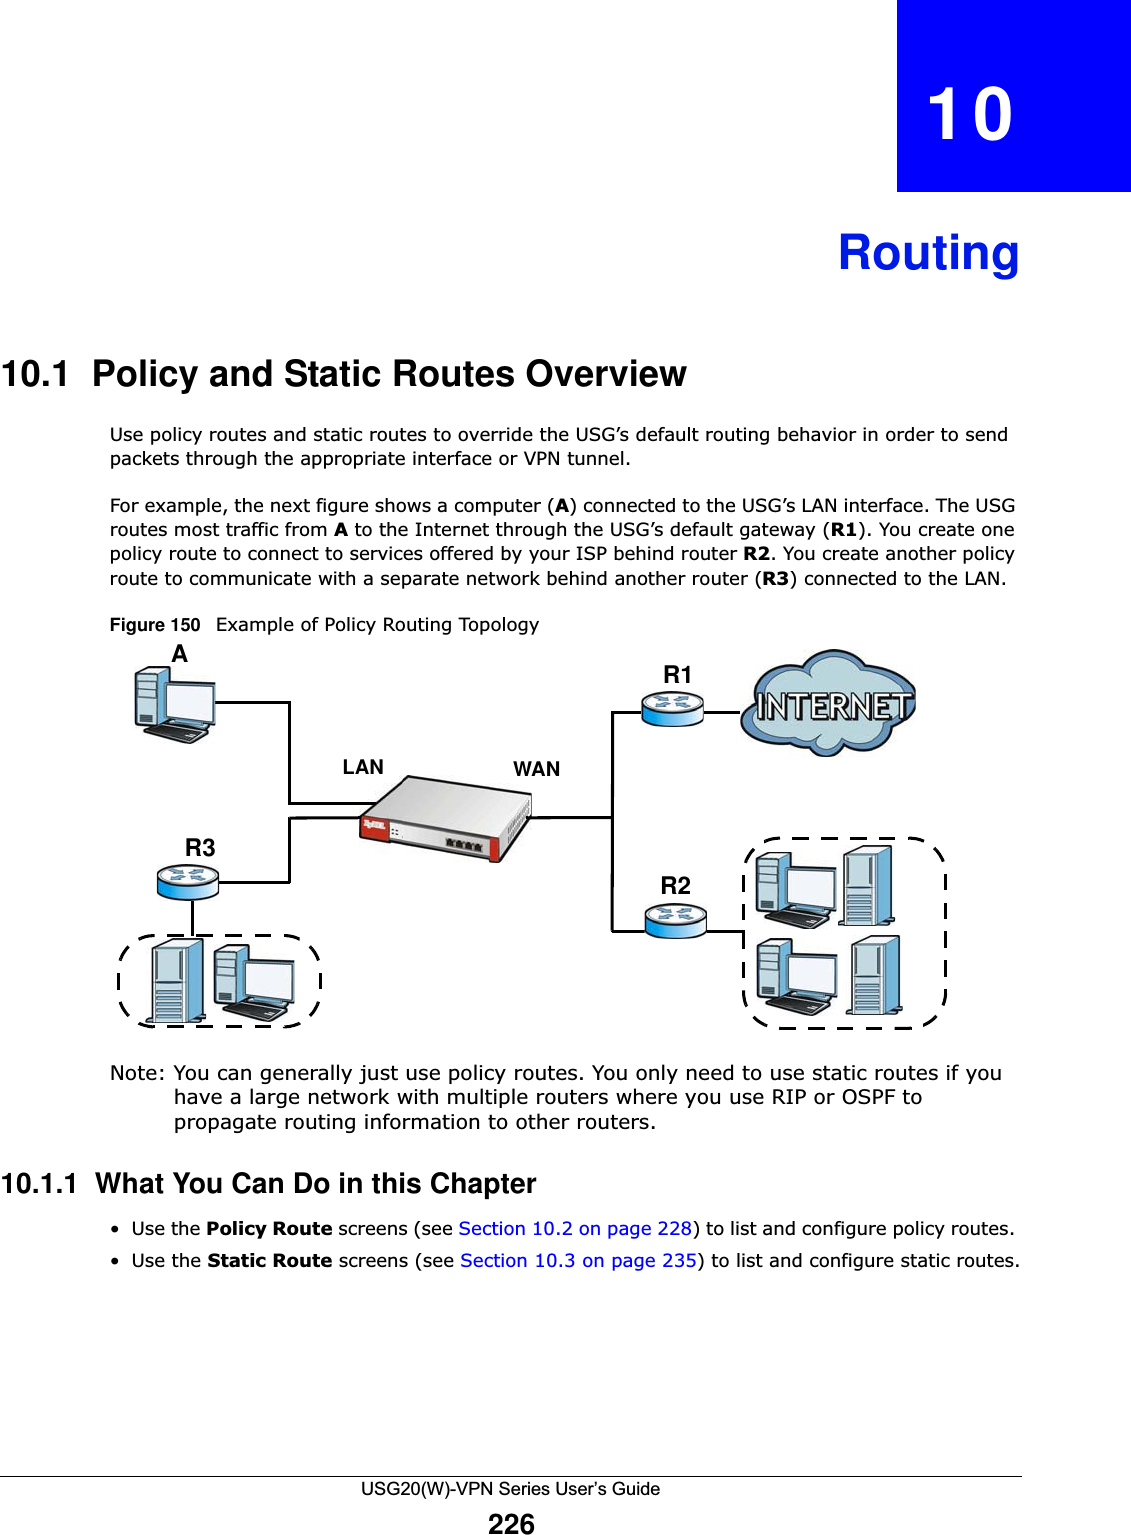 USG20(W)-VPN Series User’s Guide226CHAPTER   10Routing10.1  Policy and Static Routes OverviewUse policy routes and static routes to override the USG’s default routing behavior in order to send packets through the appropriate interface or VPN tunnel. For example, the next figure shows a computer (A) connected to the USG’s LAN interface. The USG routes most traffic from Ato the Internet through the USG’s default gateway (R1). You create one policy route to connect to services offered by your ISP behind router R2. You create another policy route to communicate with a separate network behind another router (R3) connected to the LAN.Figure 150   Example of Policy Routing TopologyNote: You can generally just use policy routes. You only need to use static routes if you have a large network with multiple routers where you use RIP or OSPF to propagate routing information to other routers. 10.1.1  What You Can Do in this Chapter•Use the Policy Route screens (see Section 10.2 on page 228) to list and configure policy routes. •Use the Static Route screens (see Section 10.3 on page 235) to list and configure static routes.WANR1R2AR3LAN